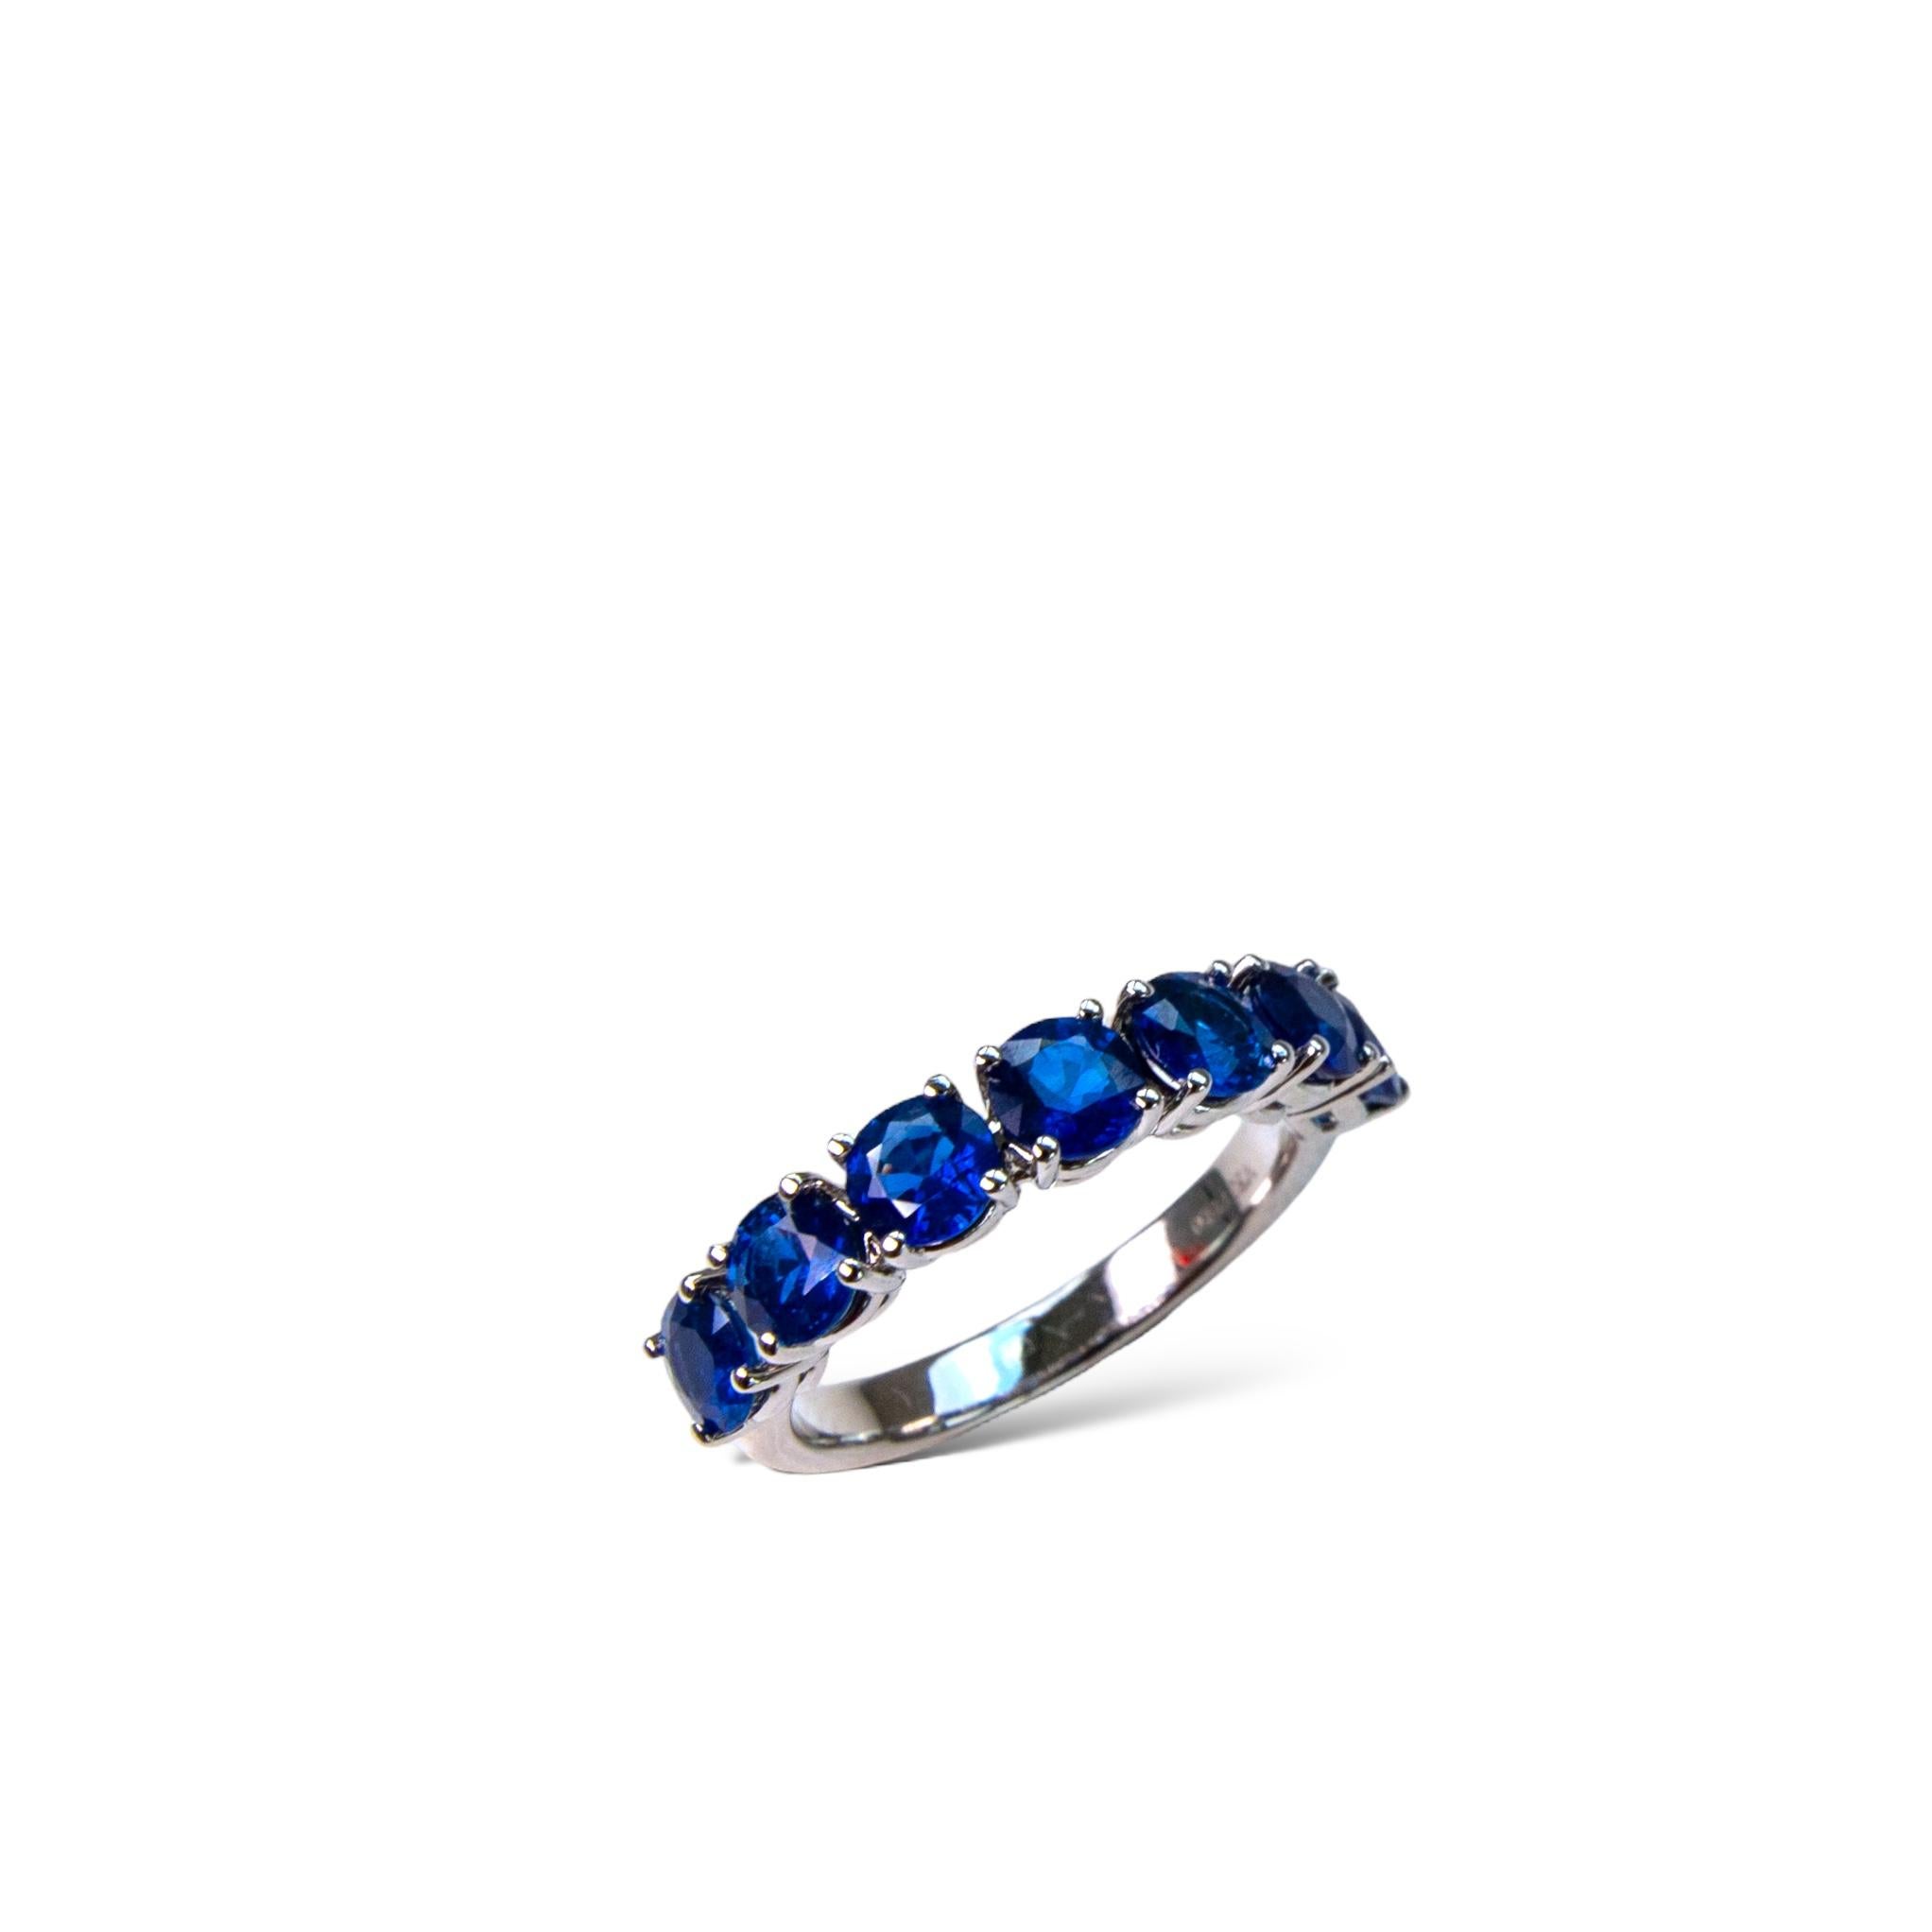 Beautiful Sri Lankan blue sapphire eternity ring featuring 7 round natural sapphires set in a solid platinum setting.

Sapphire is considered a lucky stone and is believed to attract calmness, abundance, and blessings.

This beautiful Ceylon